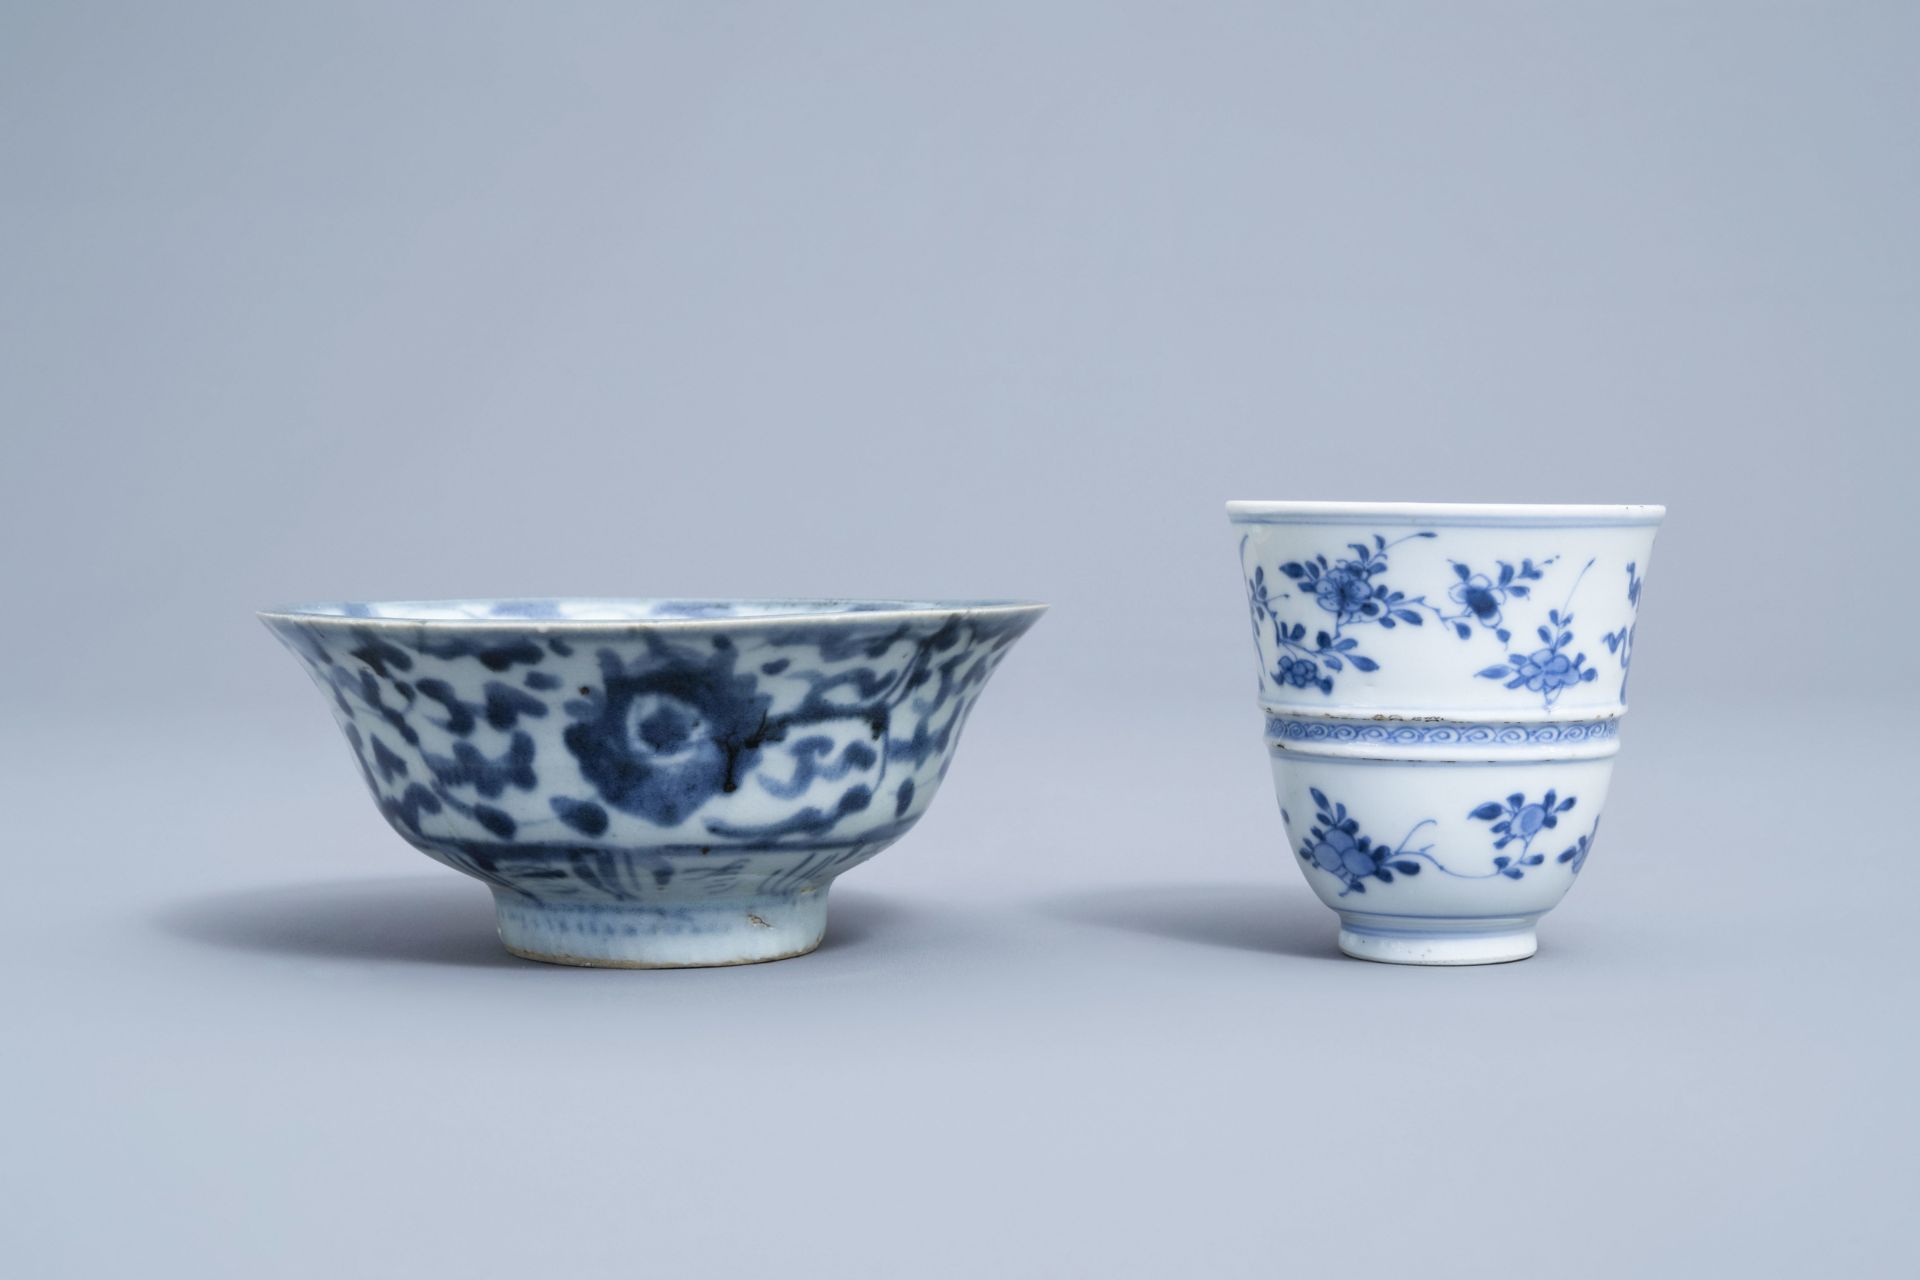 A varied collection of Chinese blue and white porcelain, 18th C. and later - Image 22 of 54